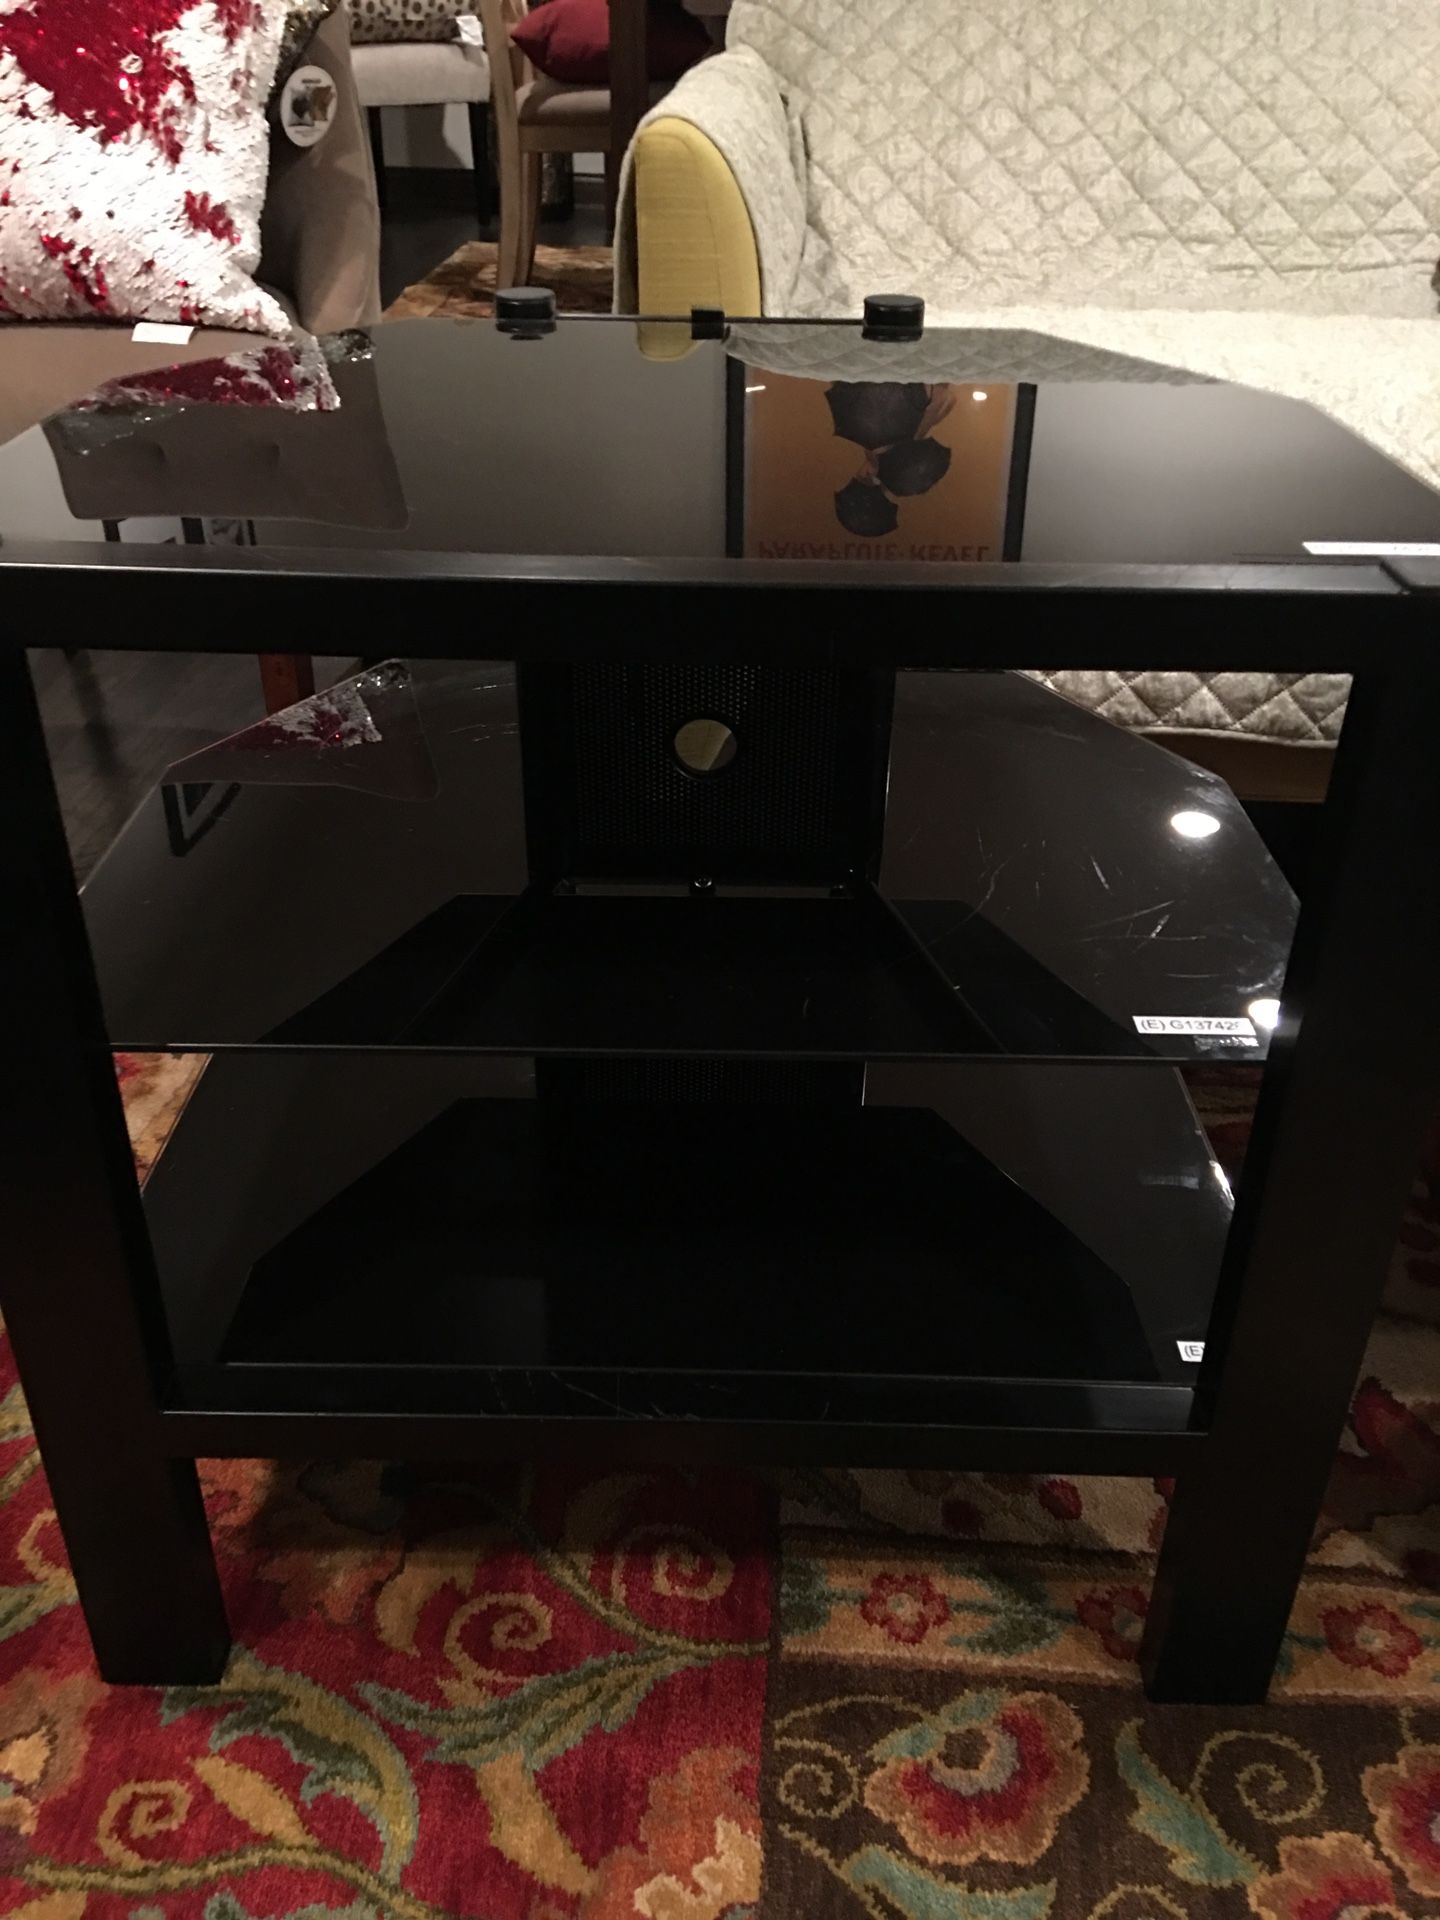 Stereo/Tv stands